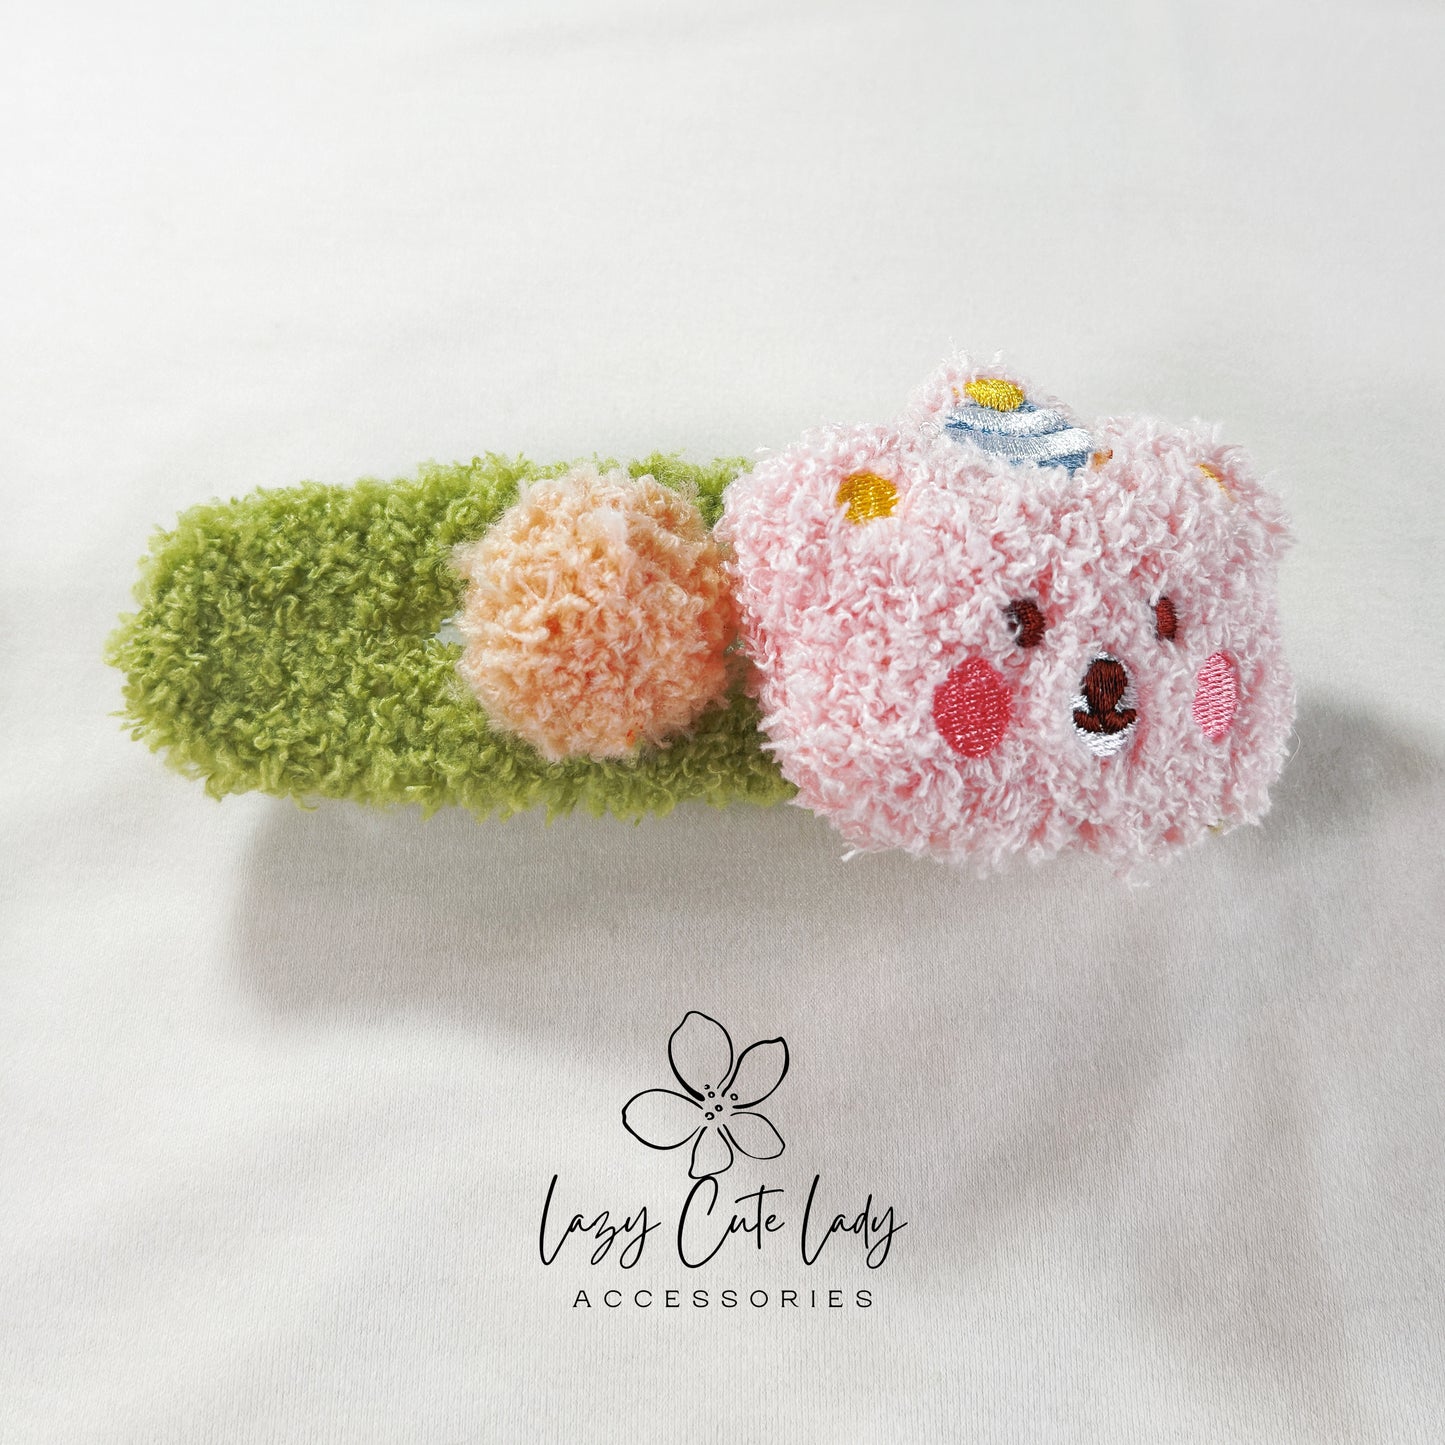 Adorable Plush Bear Hair Clip with Birthday Hat Embroidery - hair Accessory